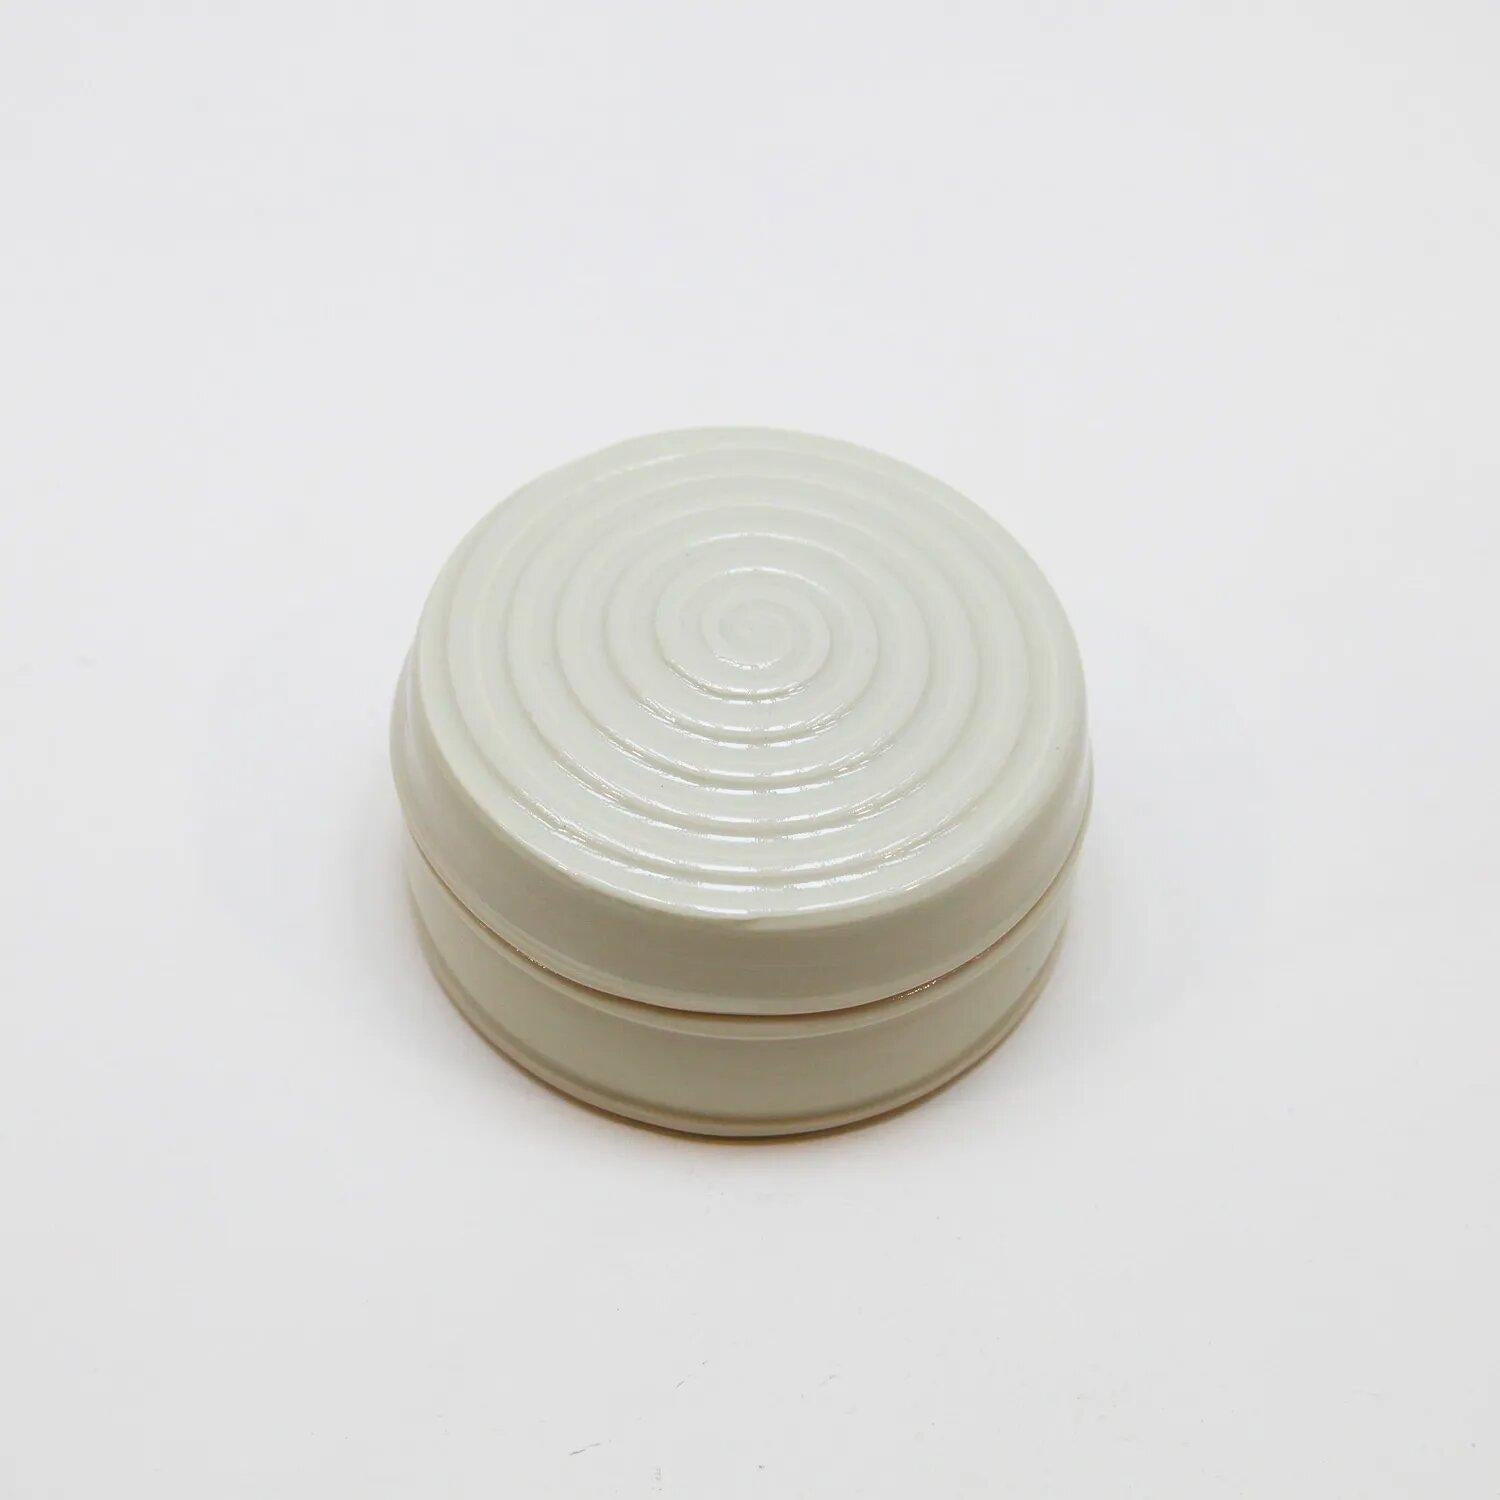 Ceramic White Functional Spiral Lidded Container  - Art by Ron Carlson